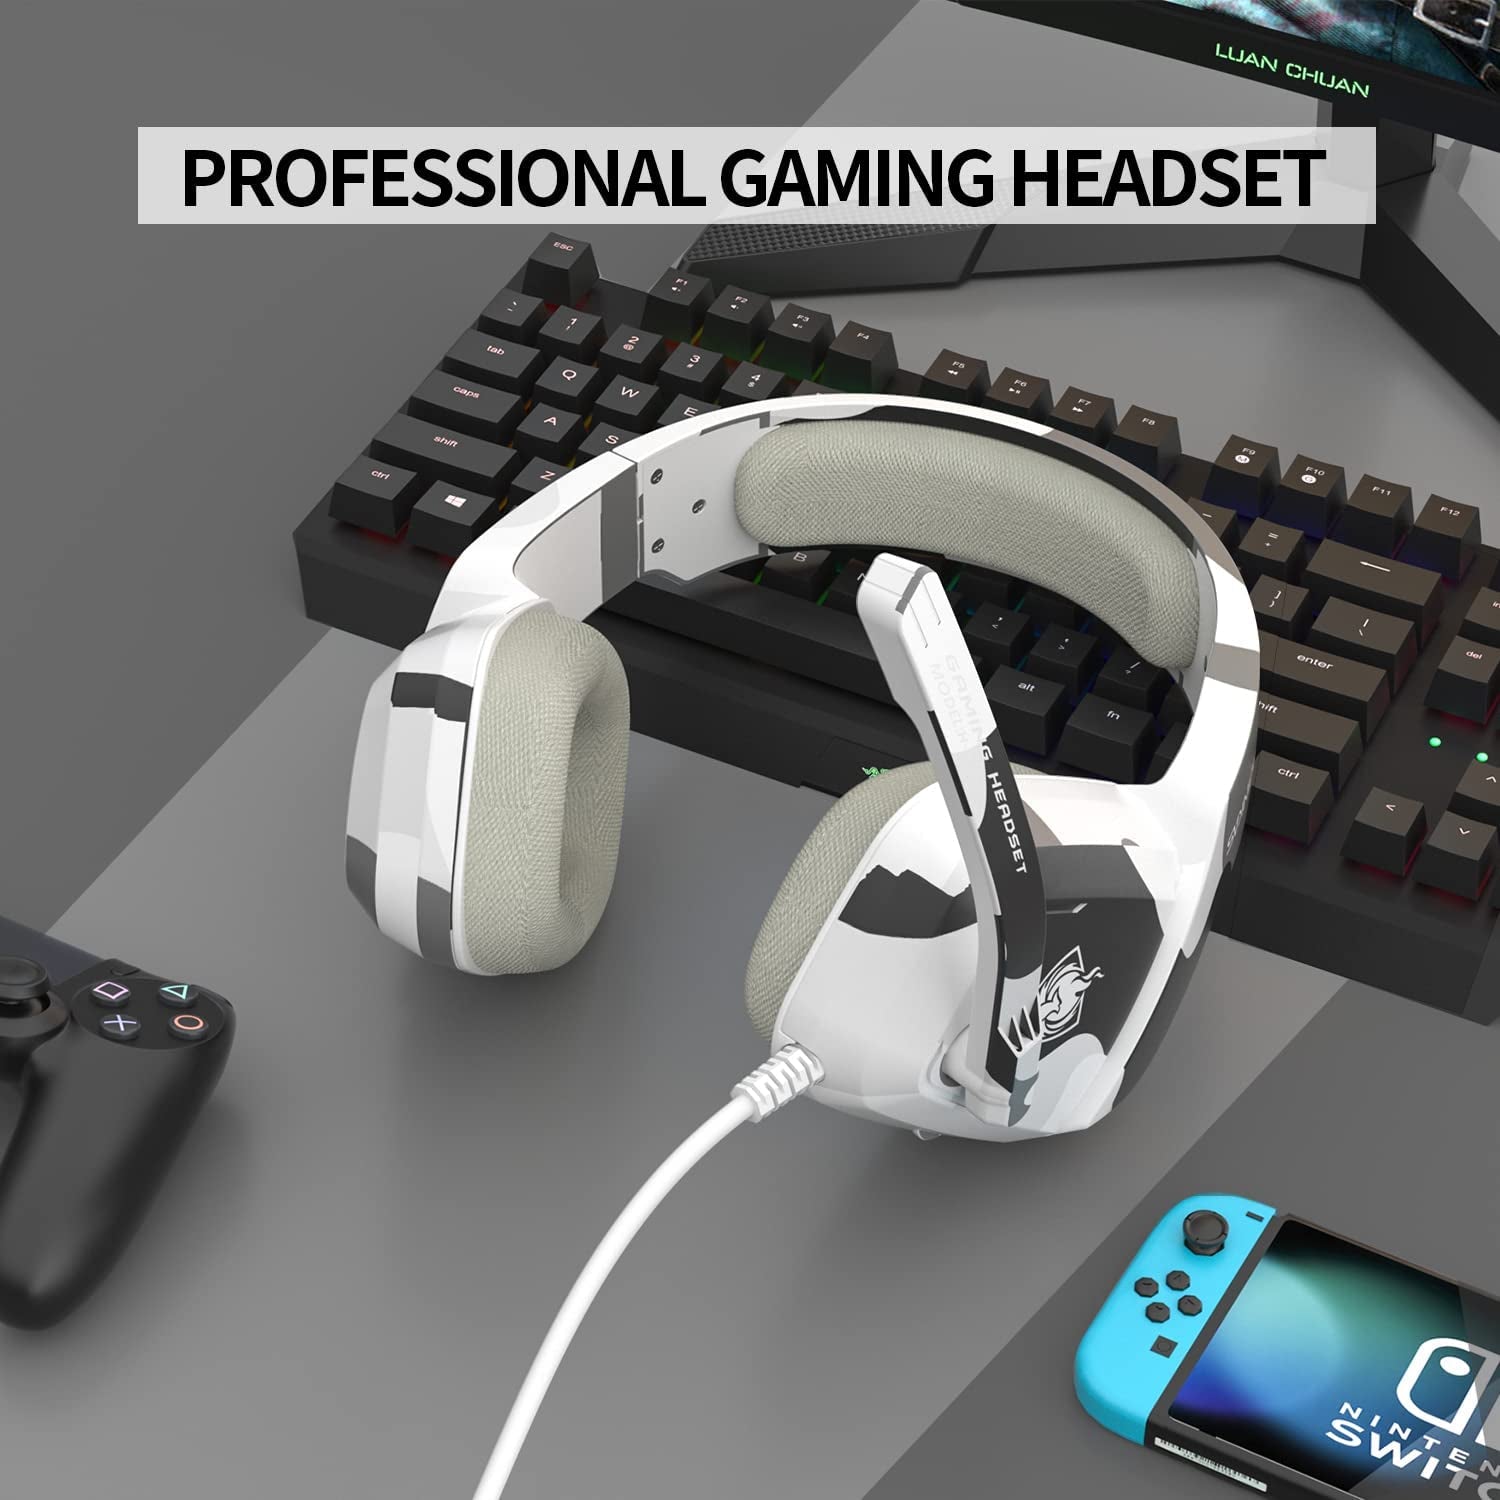 Multi-Platform Gaming Headset with Microphone - Compatible with PS4, Xbox One, PC, Mac, Nintendo Switch, 3.5mm Connectivity, Over-Ear Design with Noise-Cancellation